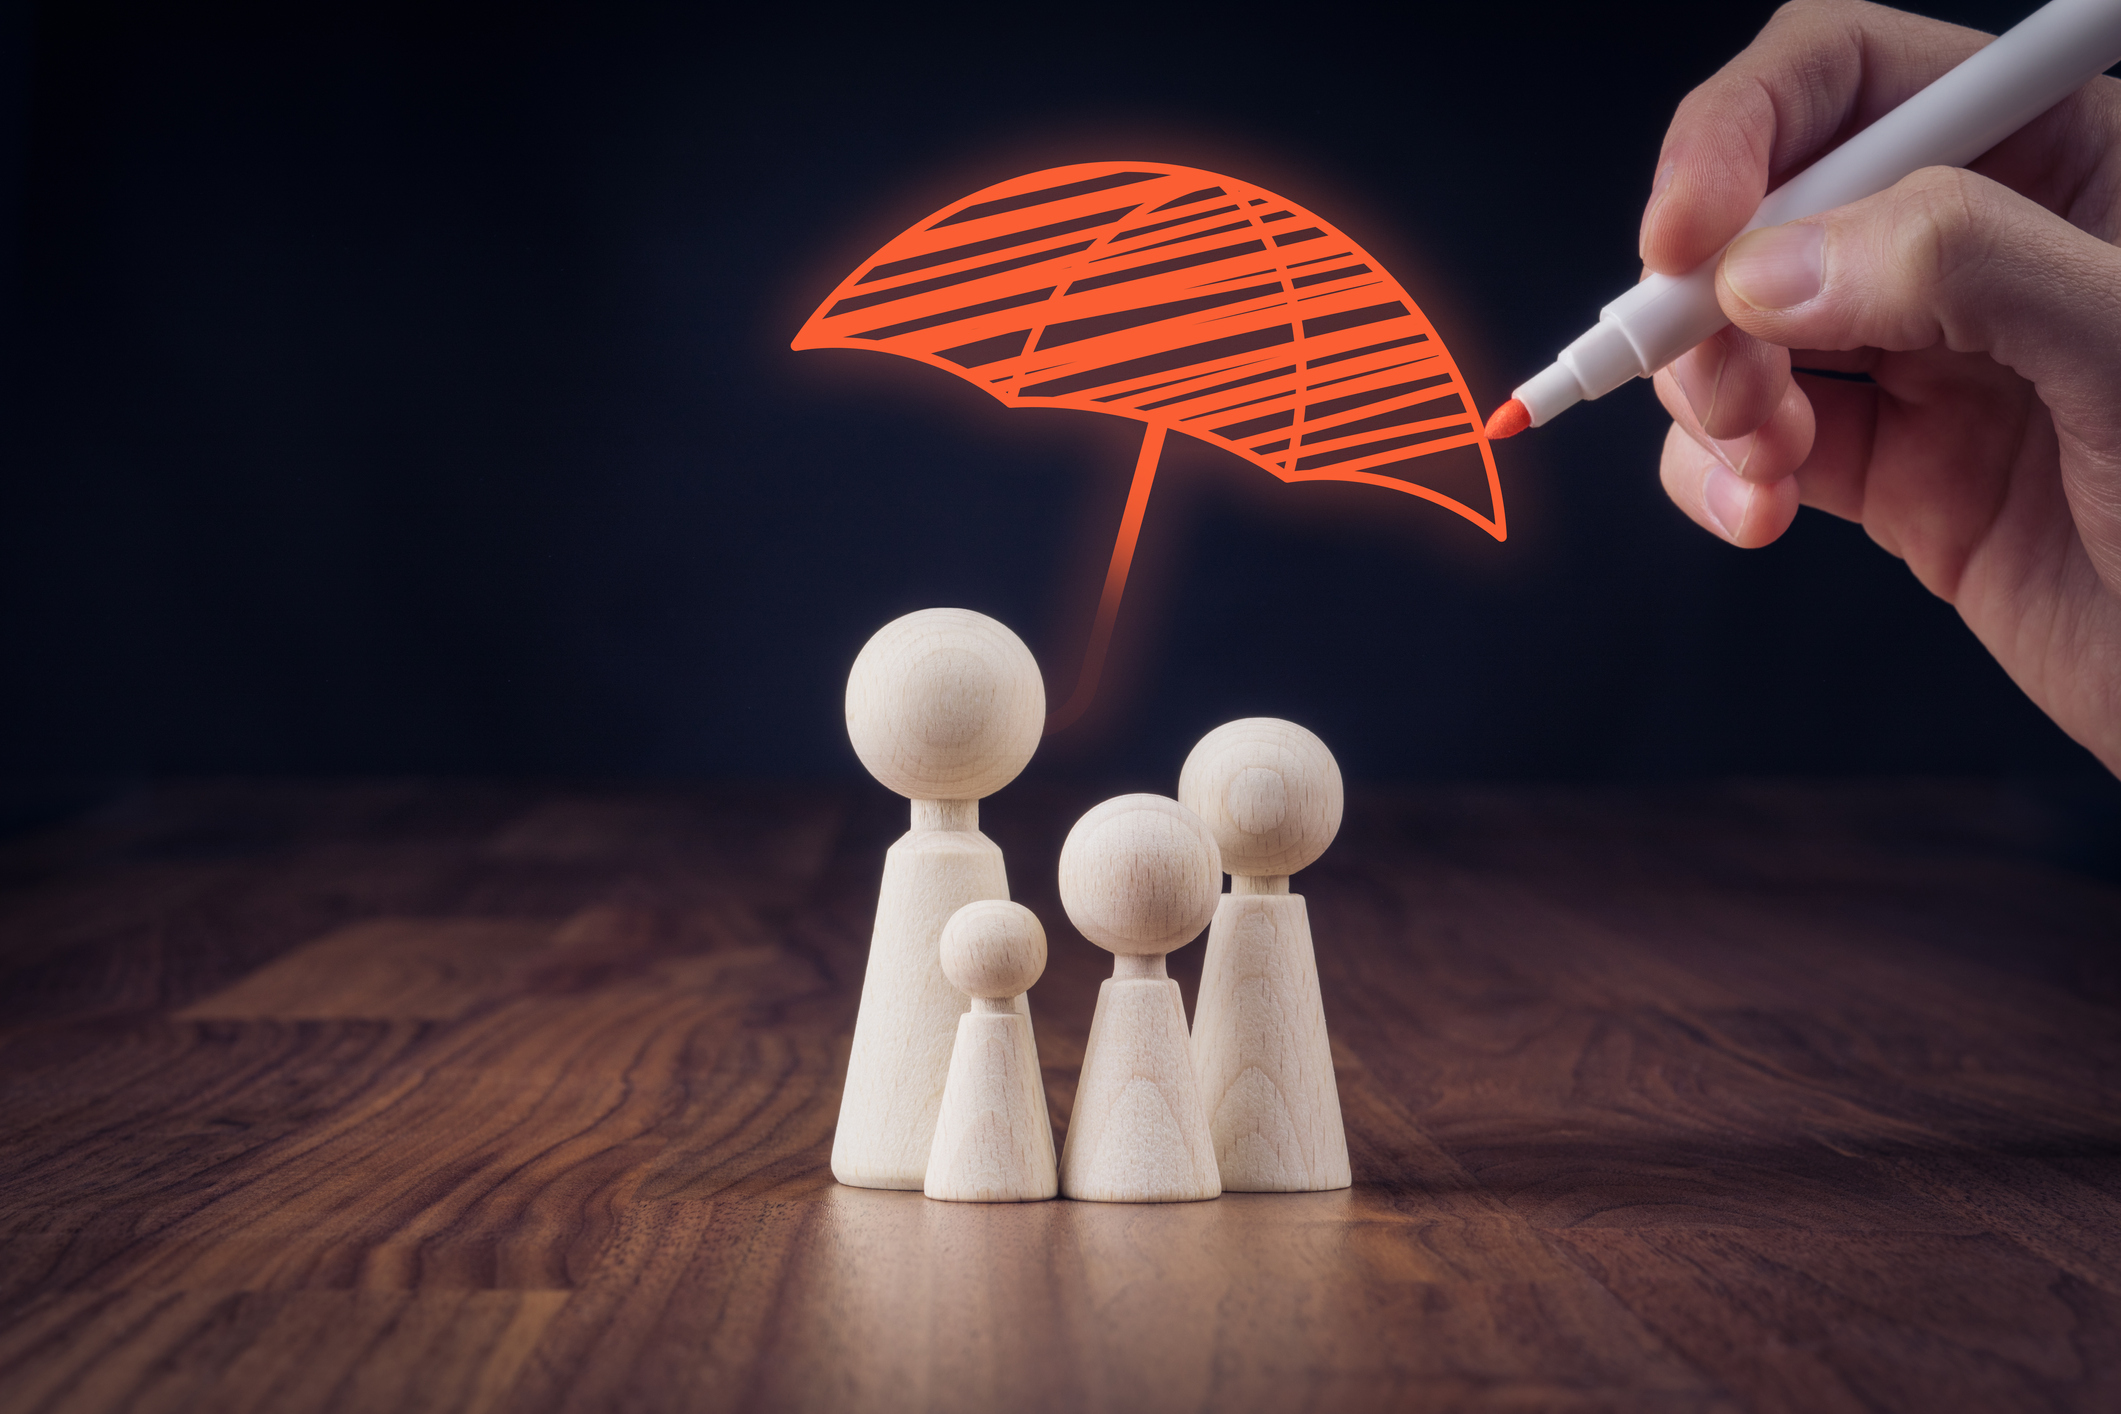 Family life and property insurance concept. Wooden figurines representing family and hand drawing umbrella, symbol of insurance.